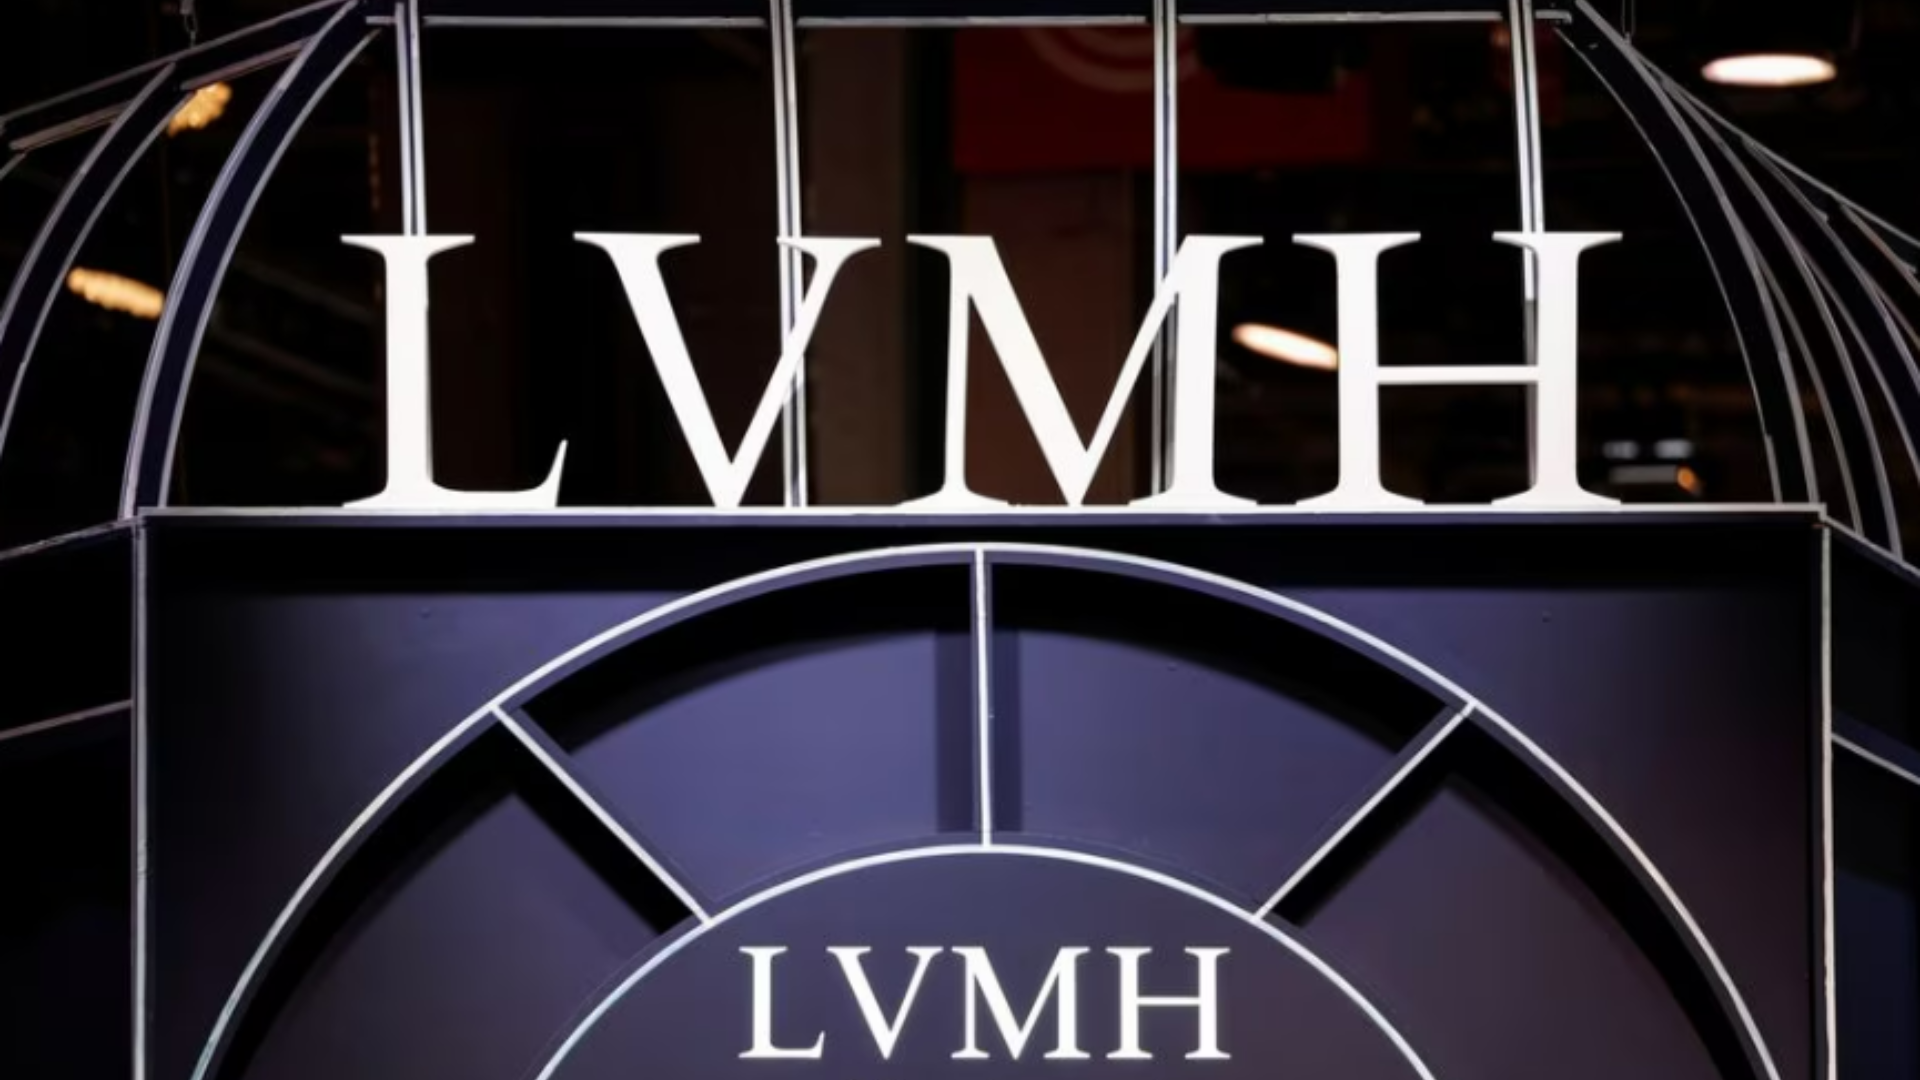 French demonstrators protest in front of the headquarters of LVMH